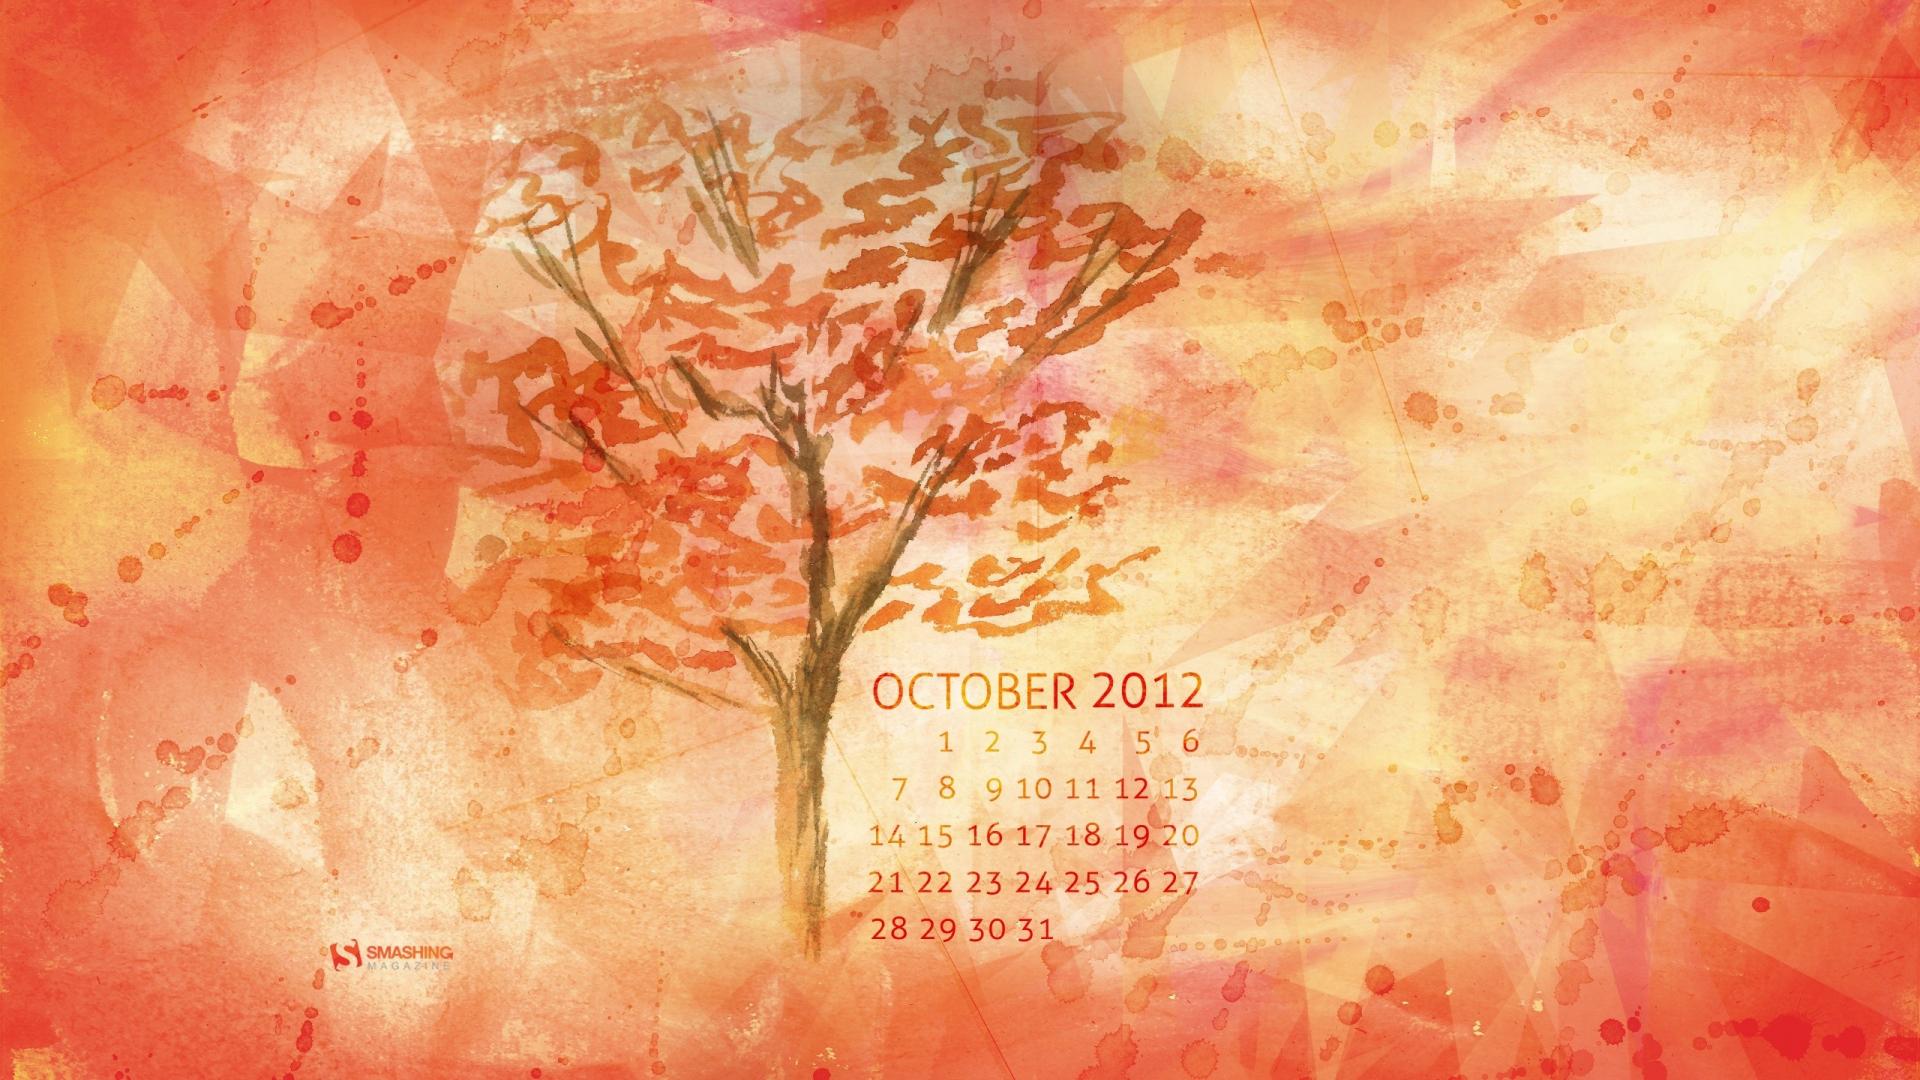 Paintings Trees Leaves Calendar October Watercolor Smashing Images, Photos, Reviews